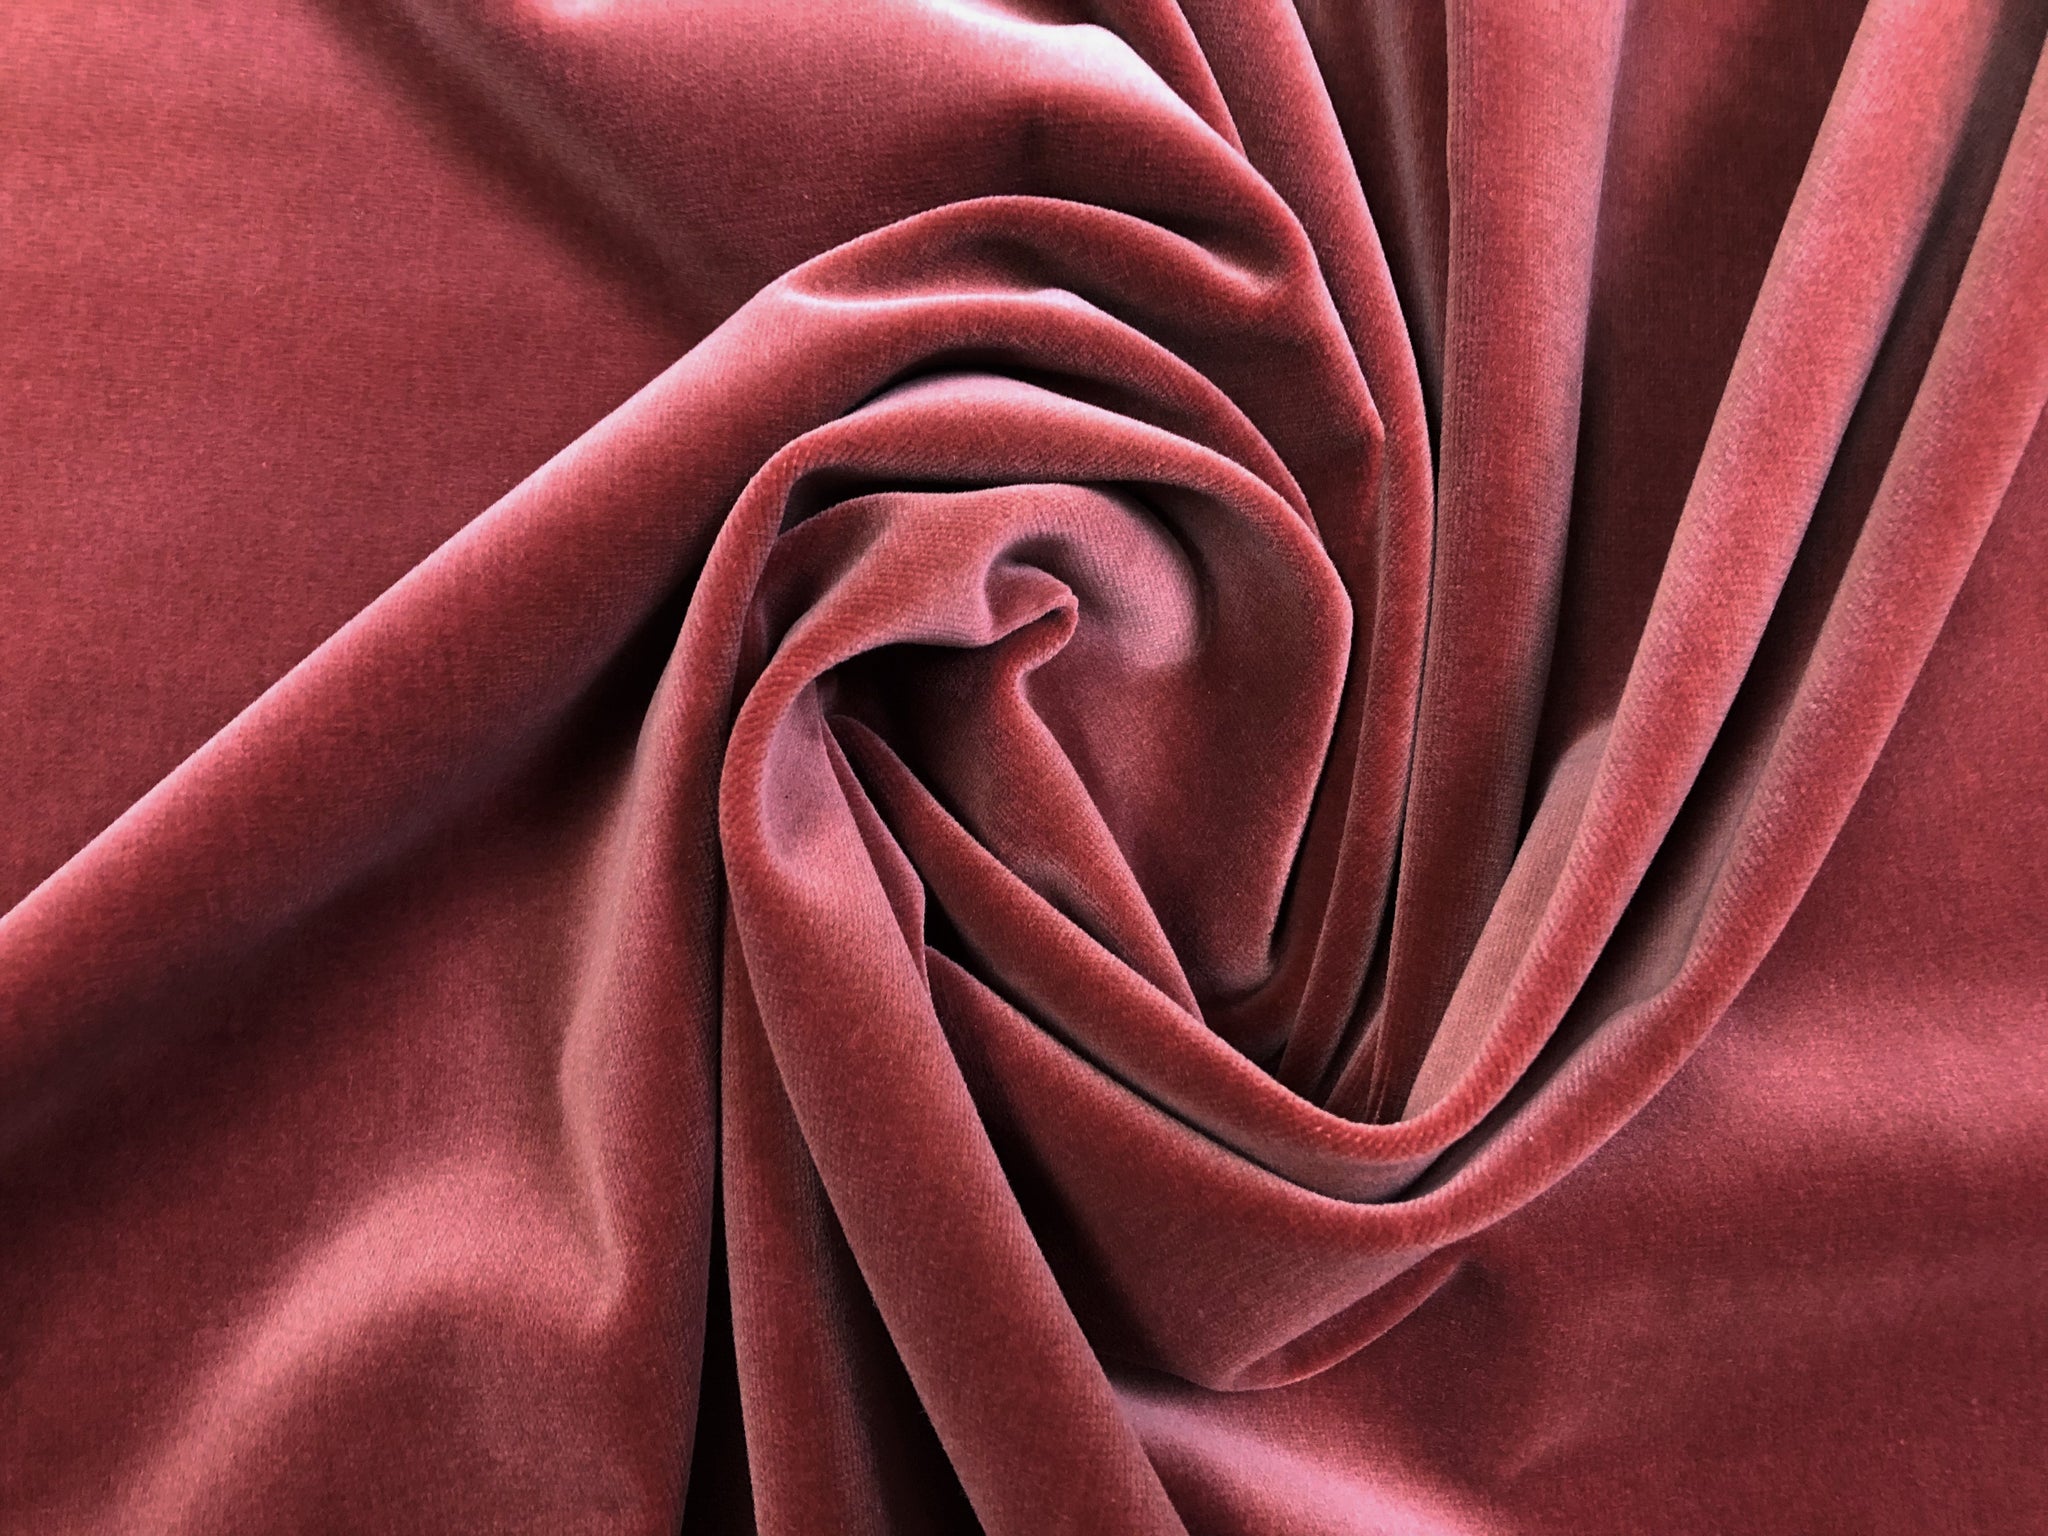 Rose Pink Plain Solid Velvet Upholstery Fabric by The Yard